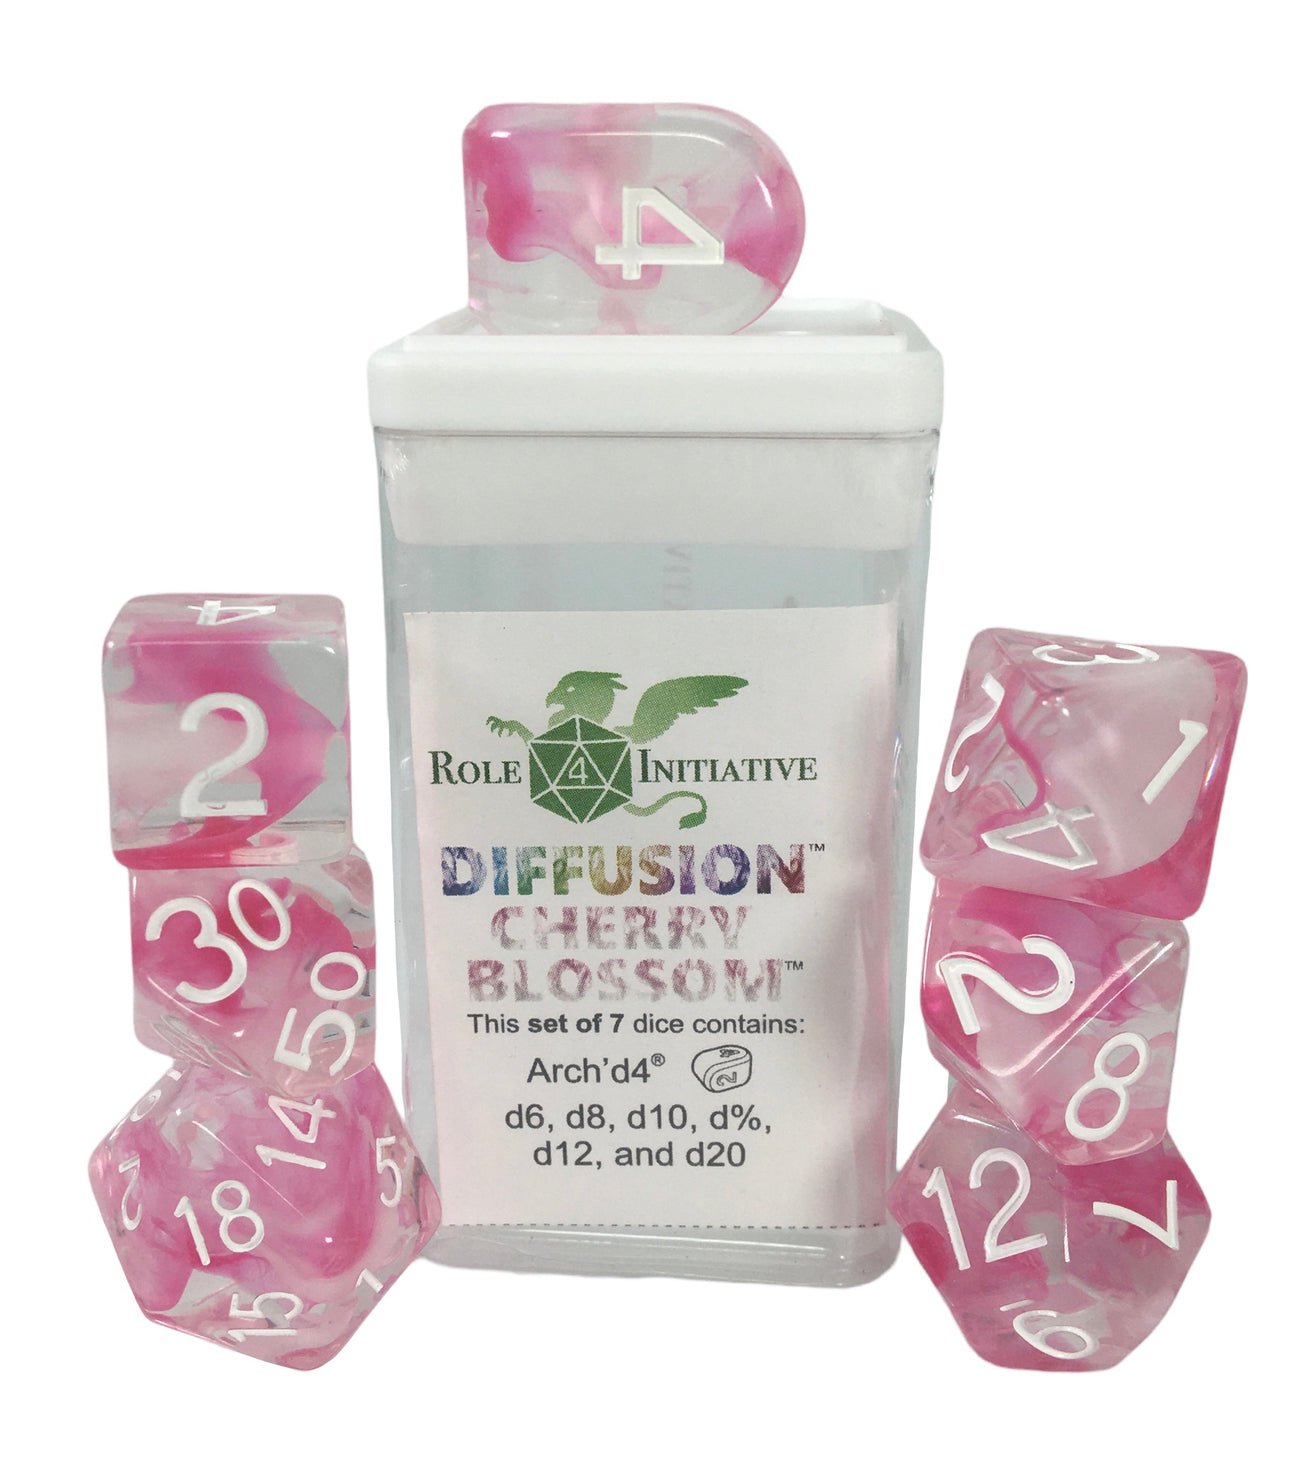 Cherry Bossom (Diffusion) - 7 dice set (with Arch’d4™) - The Fourth Place